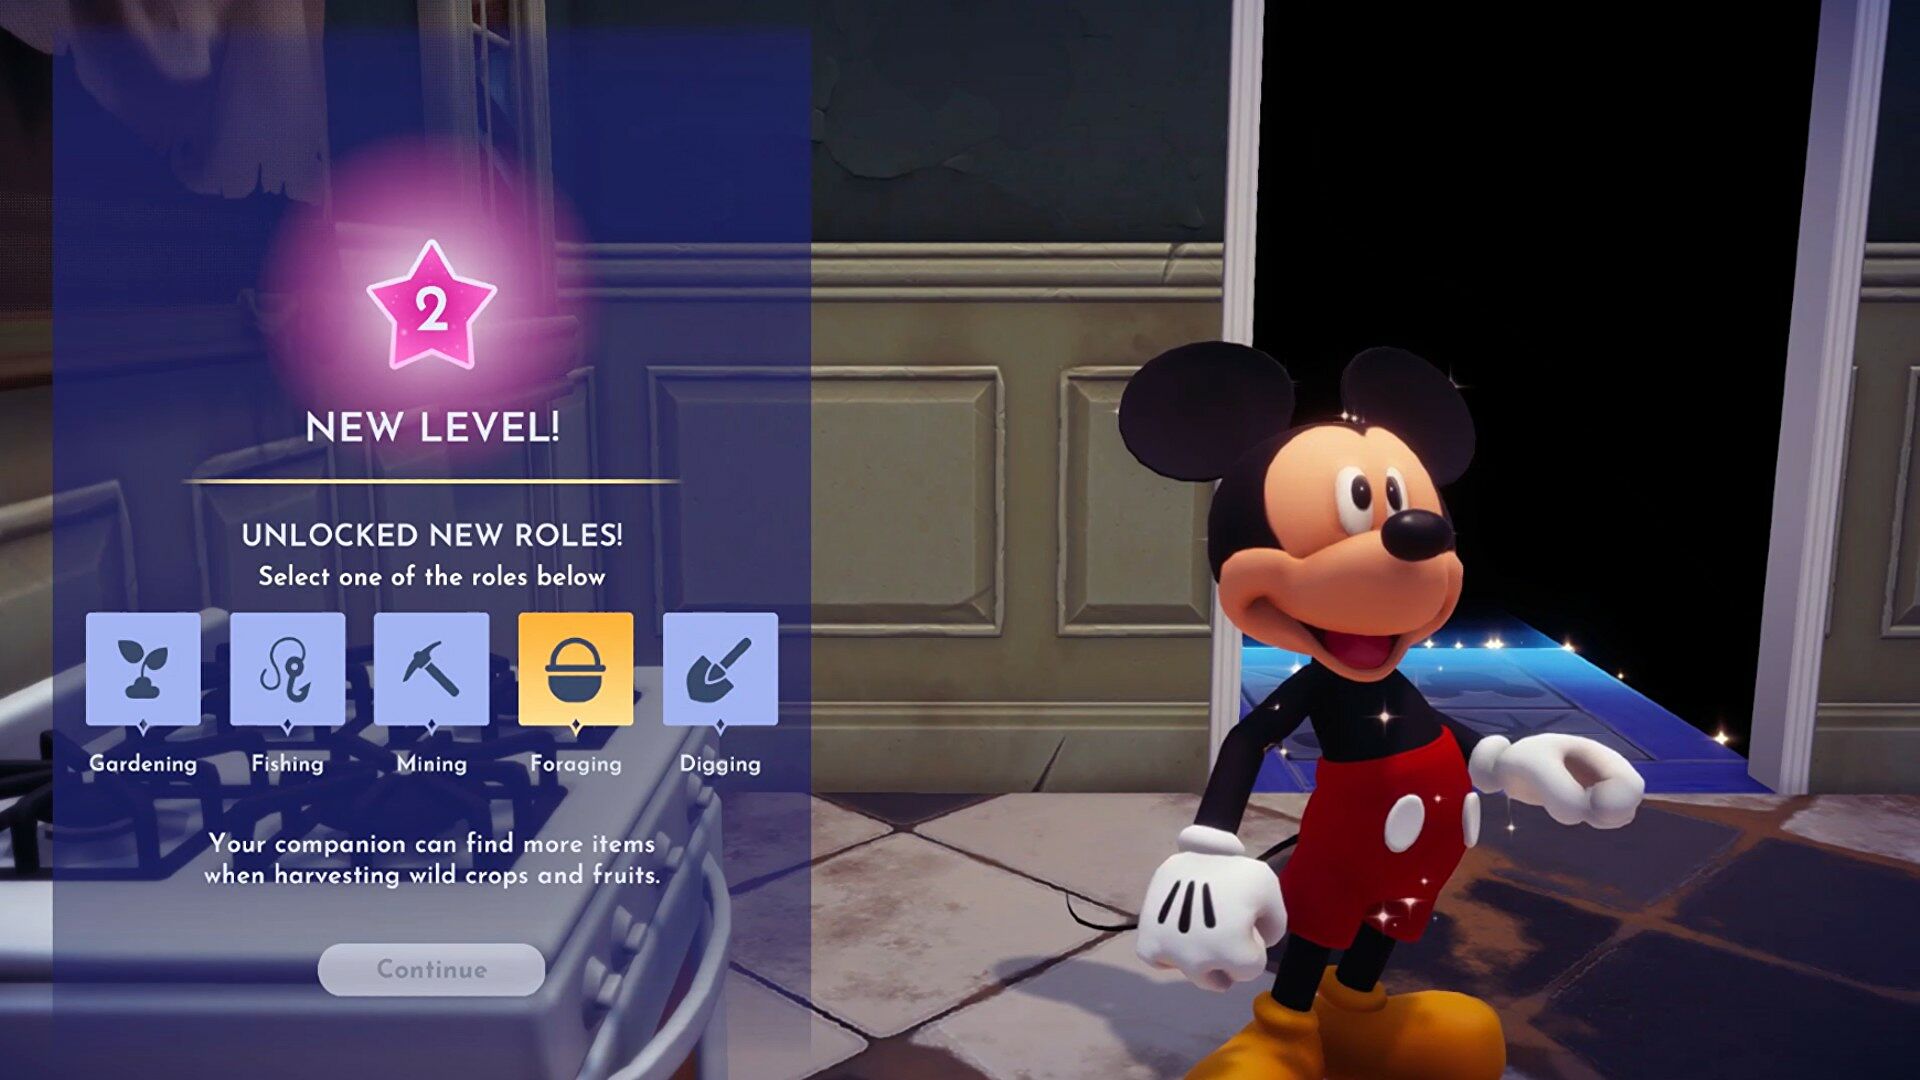 mickey's character in the game